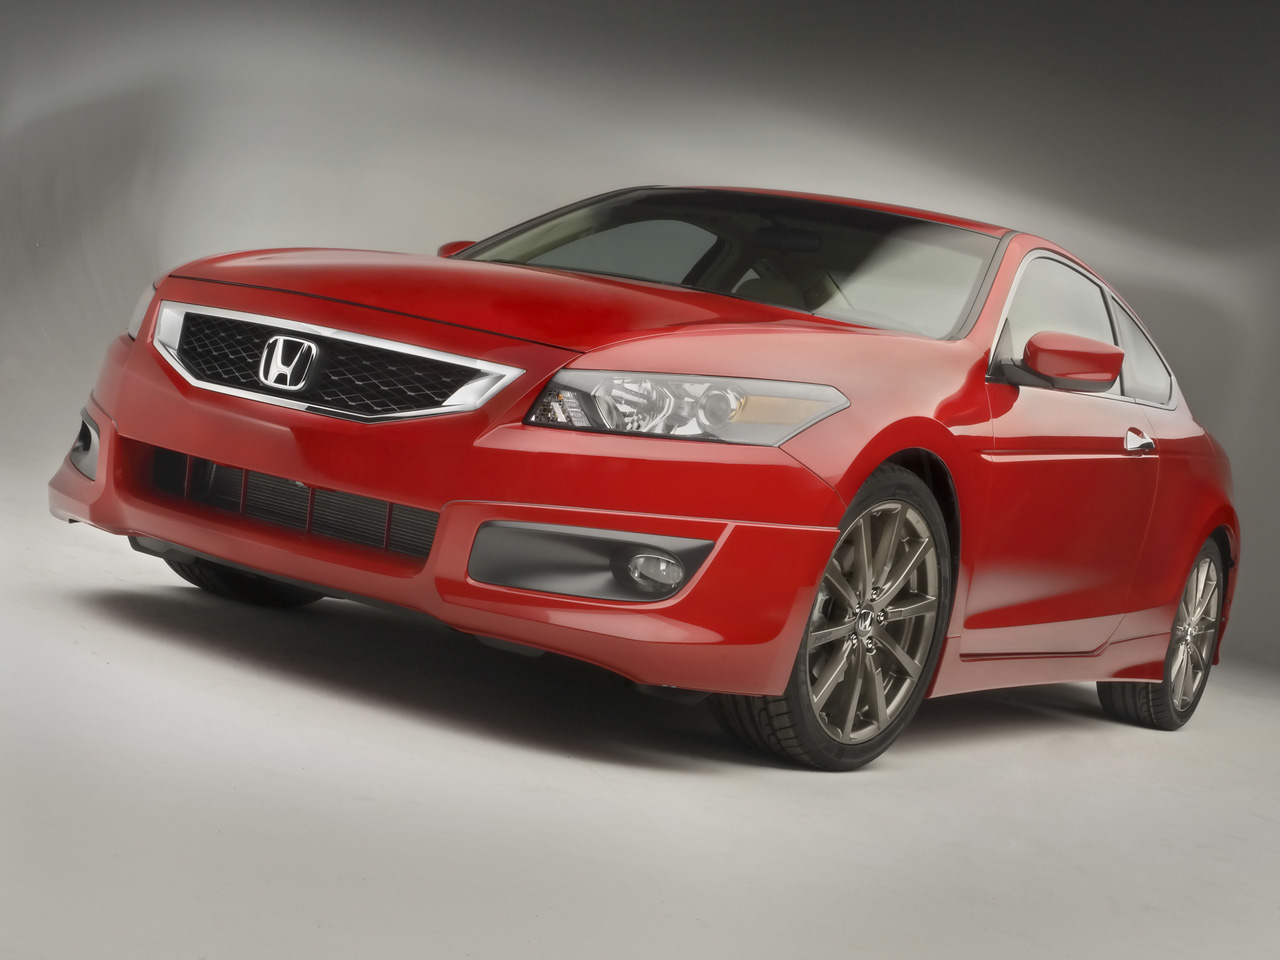 2008 Honda Factory Performance Accord Coupe